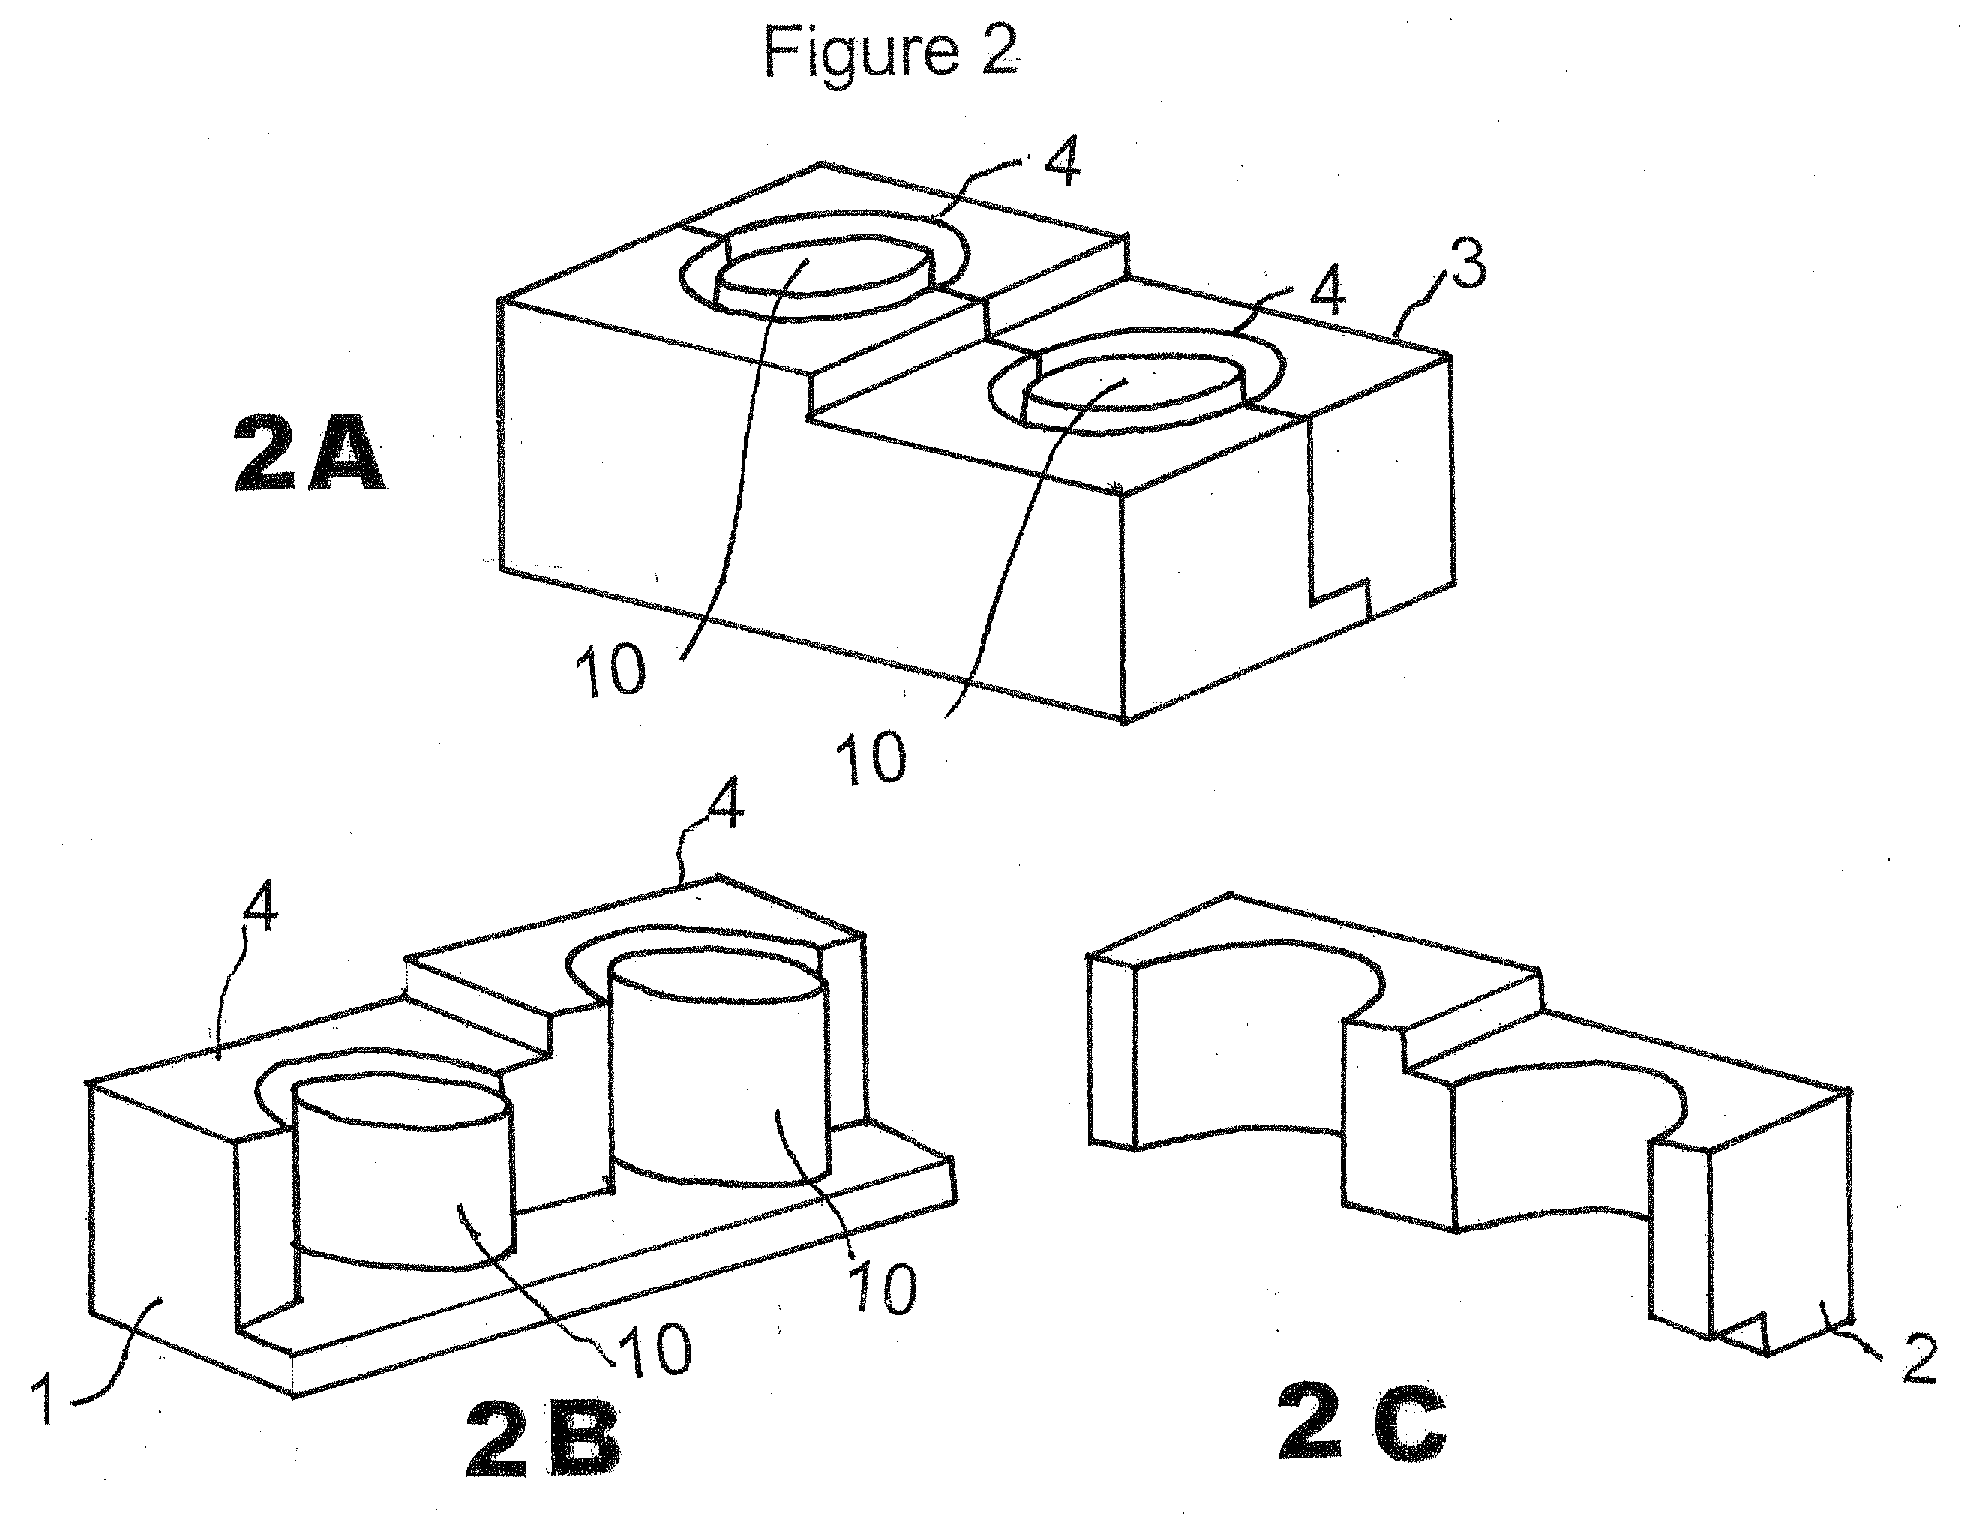 Methods for molding interbody devices in situ